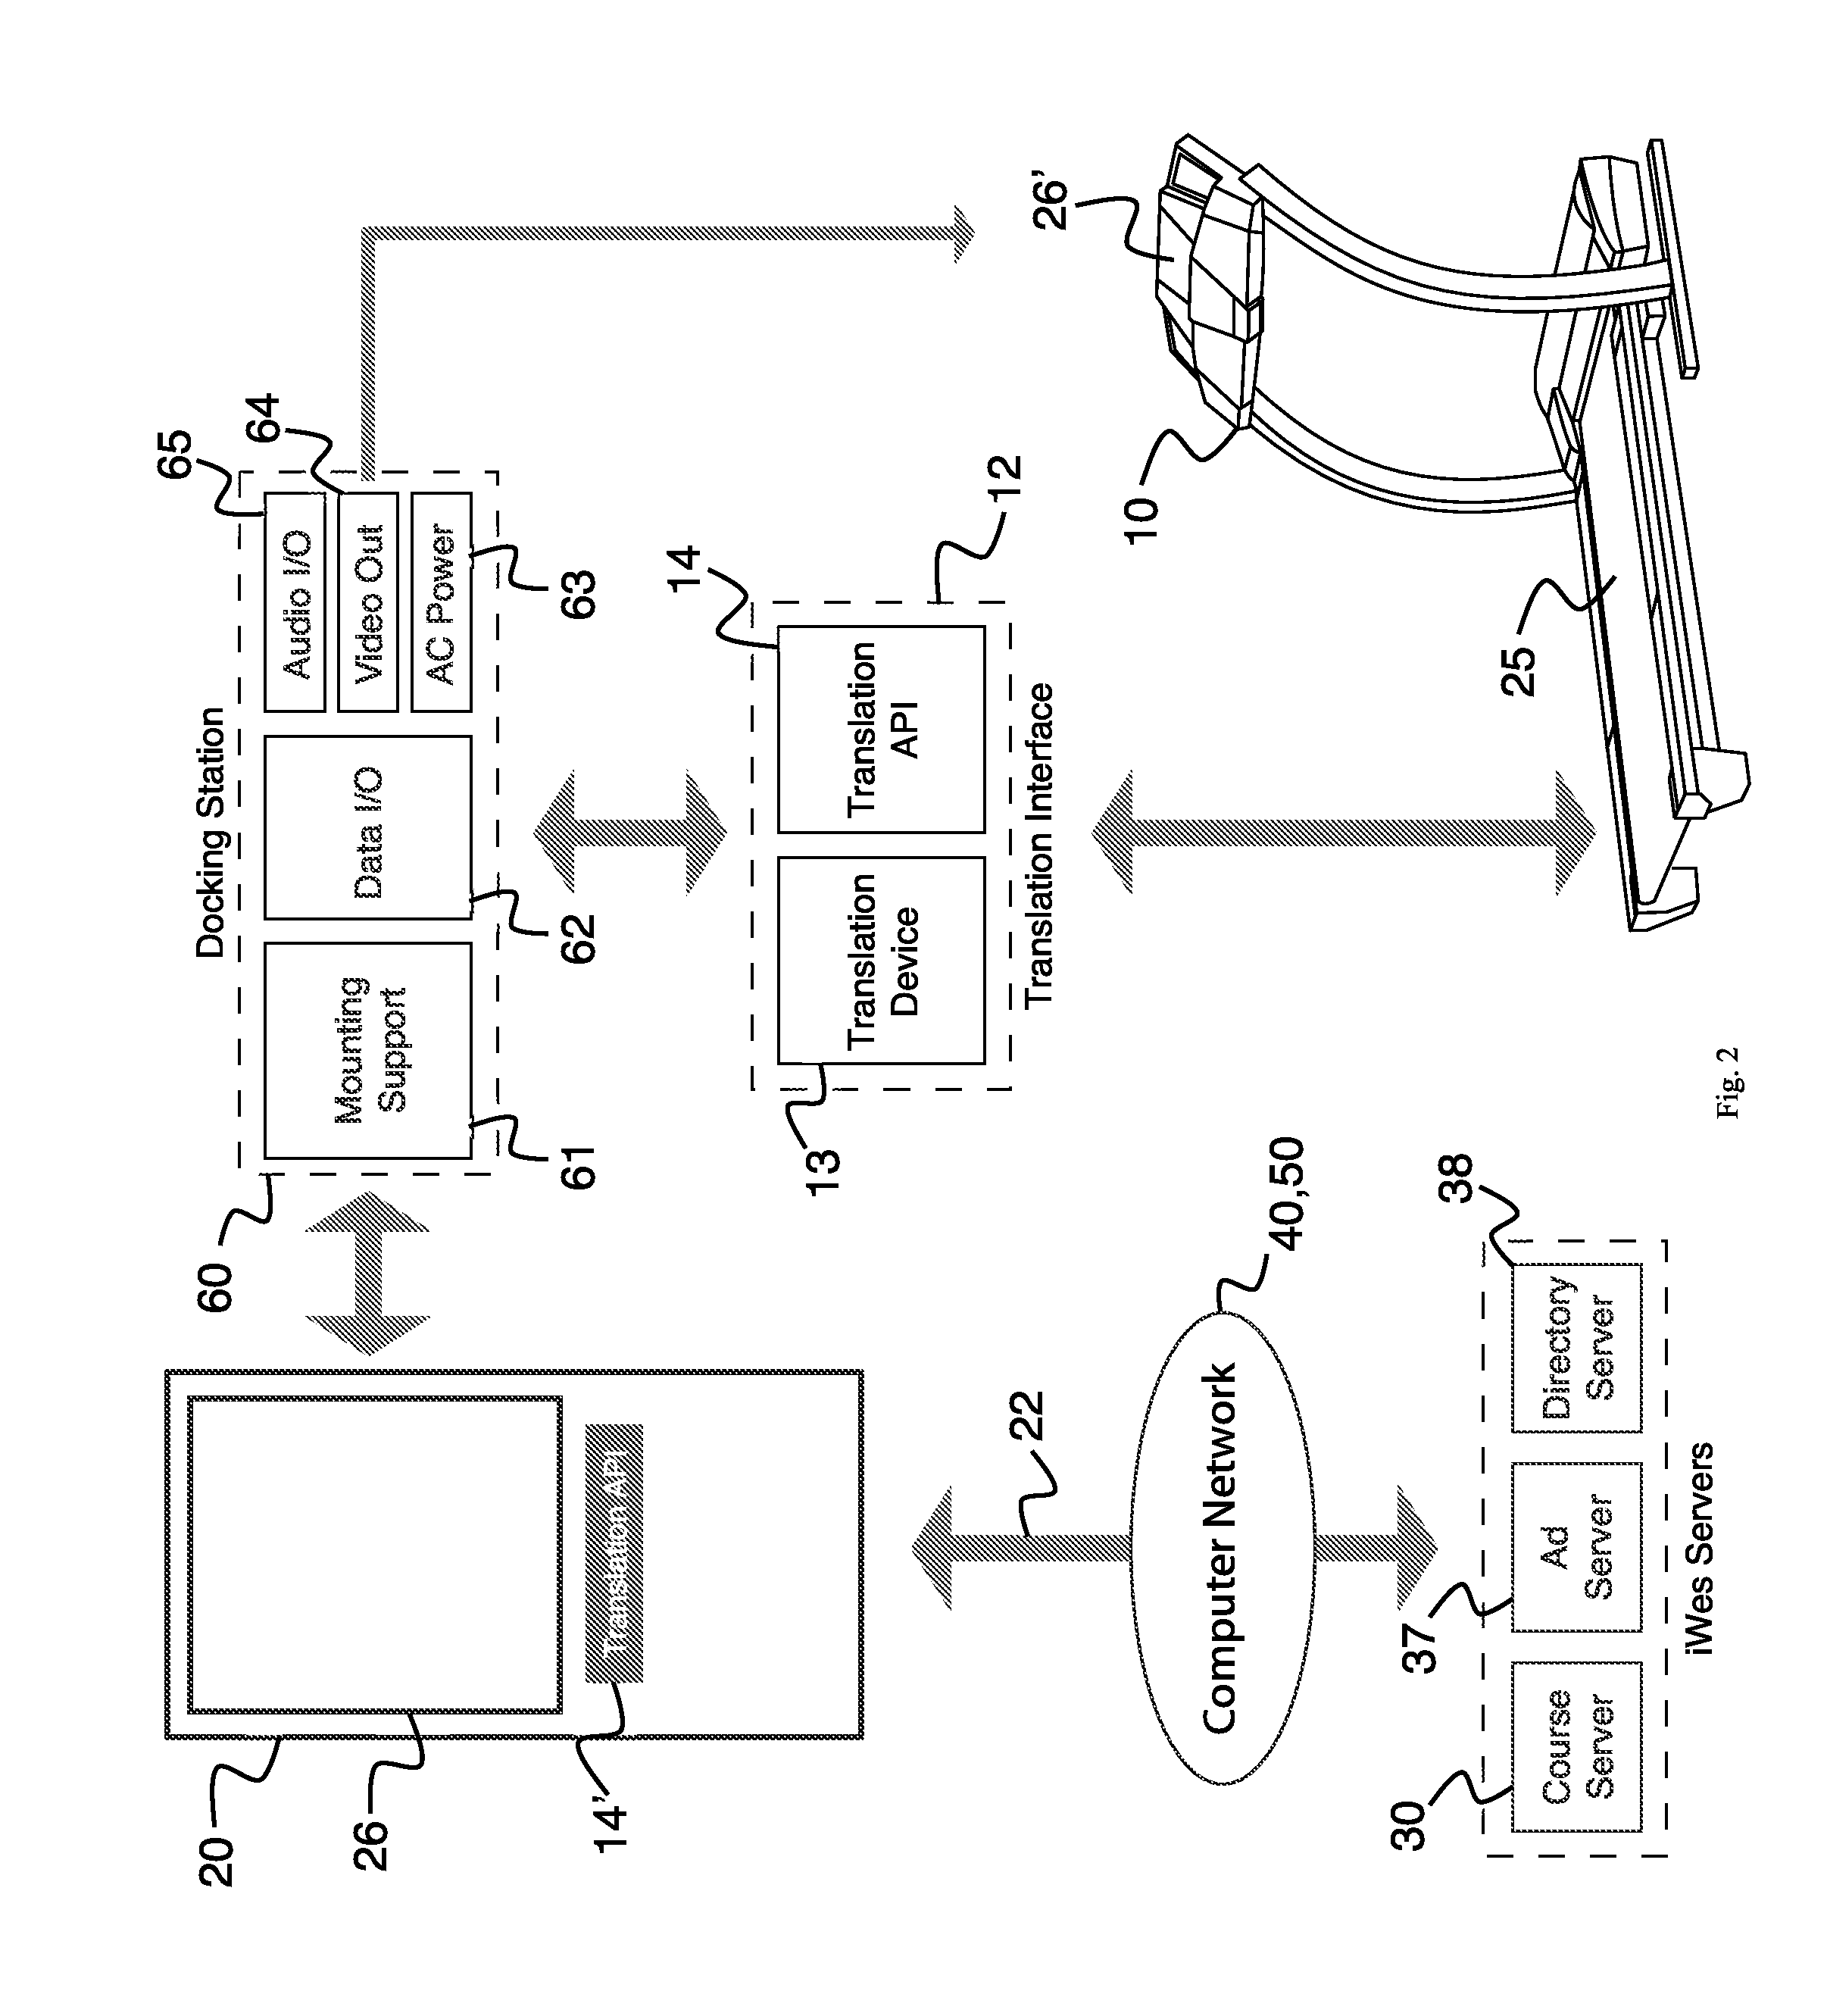 Systems and methods for exercise in an interactive virtual environment